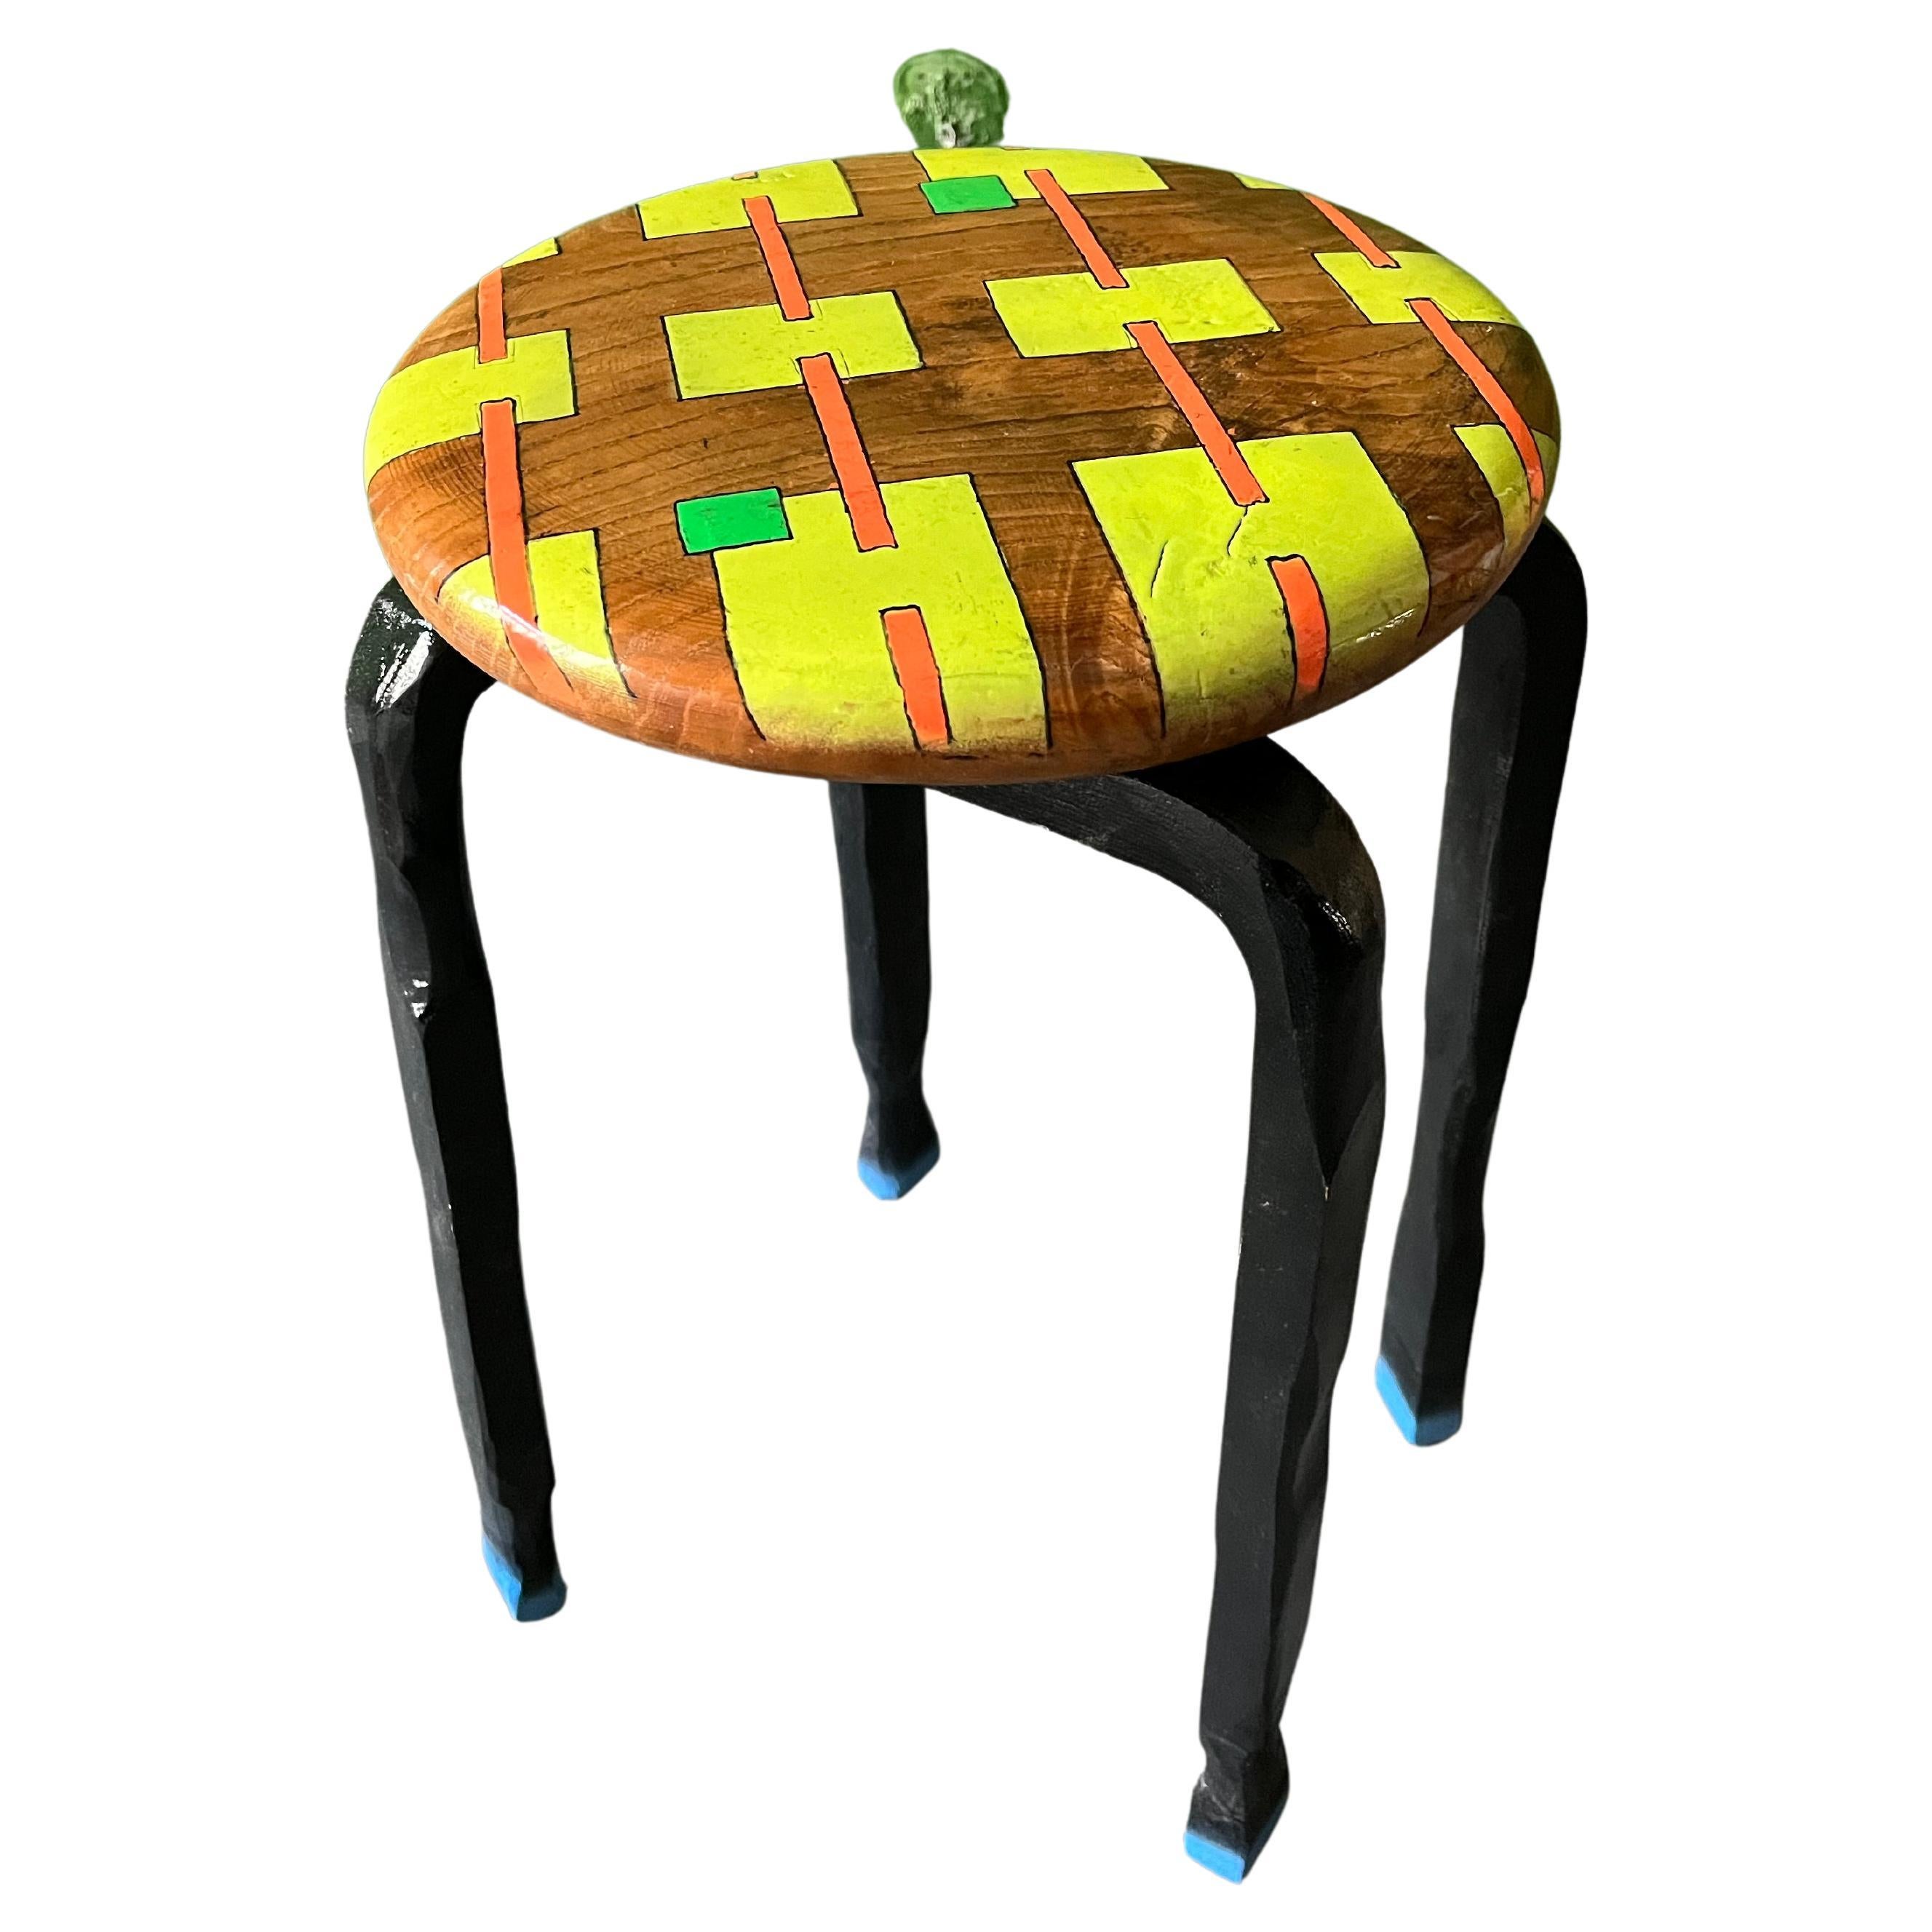 Handpainted stool, seat from a 1950s workstool, legs from Alvar Aalto. Seat painted in typical german minimalism style like Walter Dexel and such, multi-lacquered in 2k high gloss varnish.

I learn out of a past that has been created for me, a